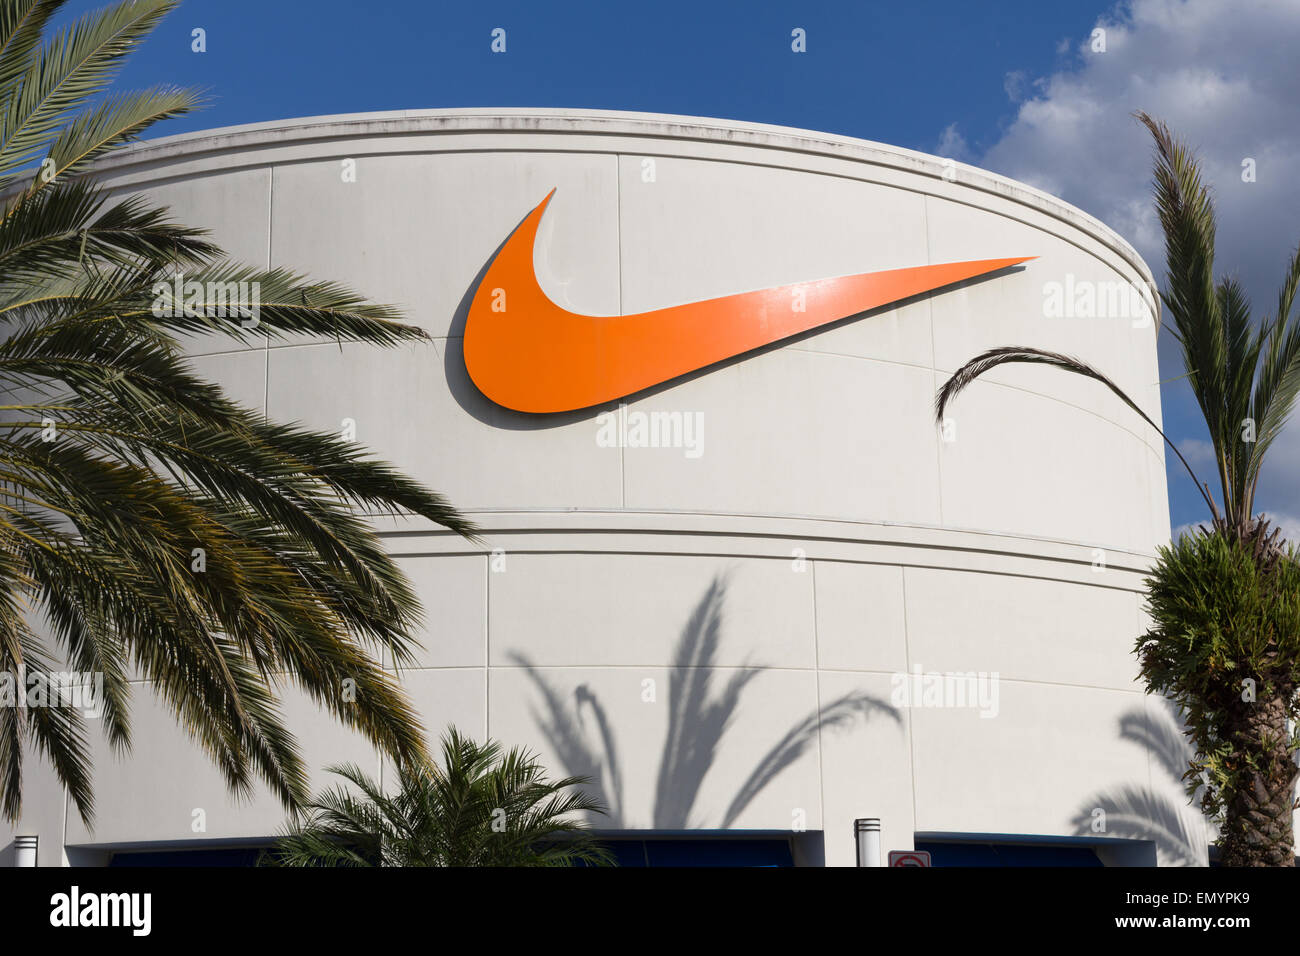 Nike sign at Orlando Premium Outlet Shopping Mall at Vineland Stock Photo: 81745085 - Alamy